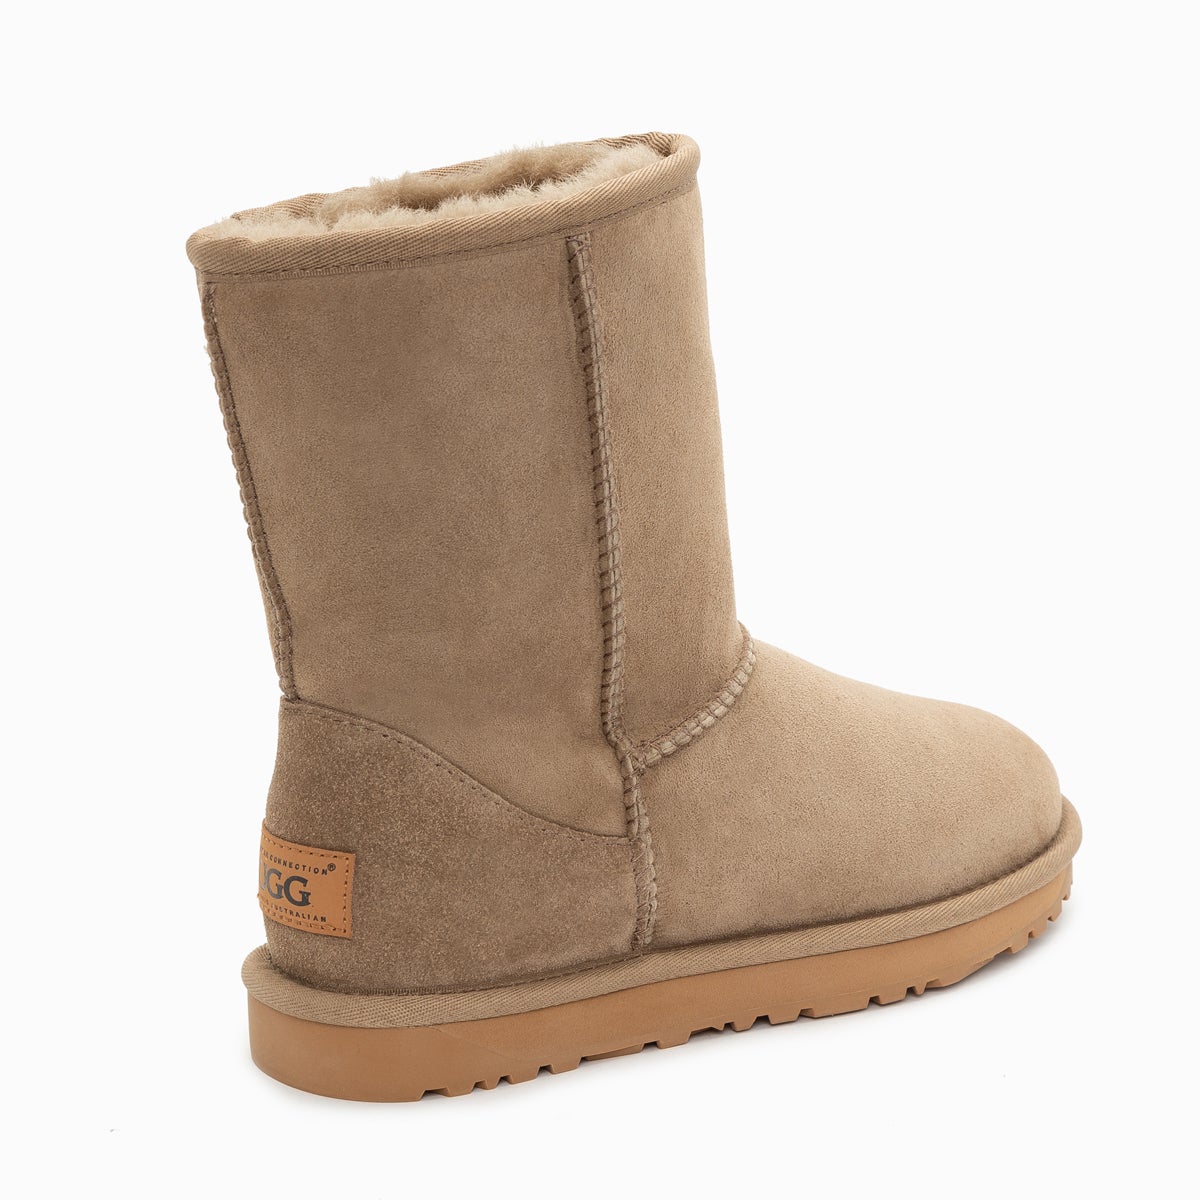 OZWEAR UGG CLASSIC SHORT BOOTS?WATER RESISTANT? | Buy Women's UGG Boots ...